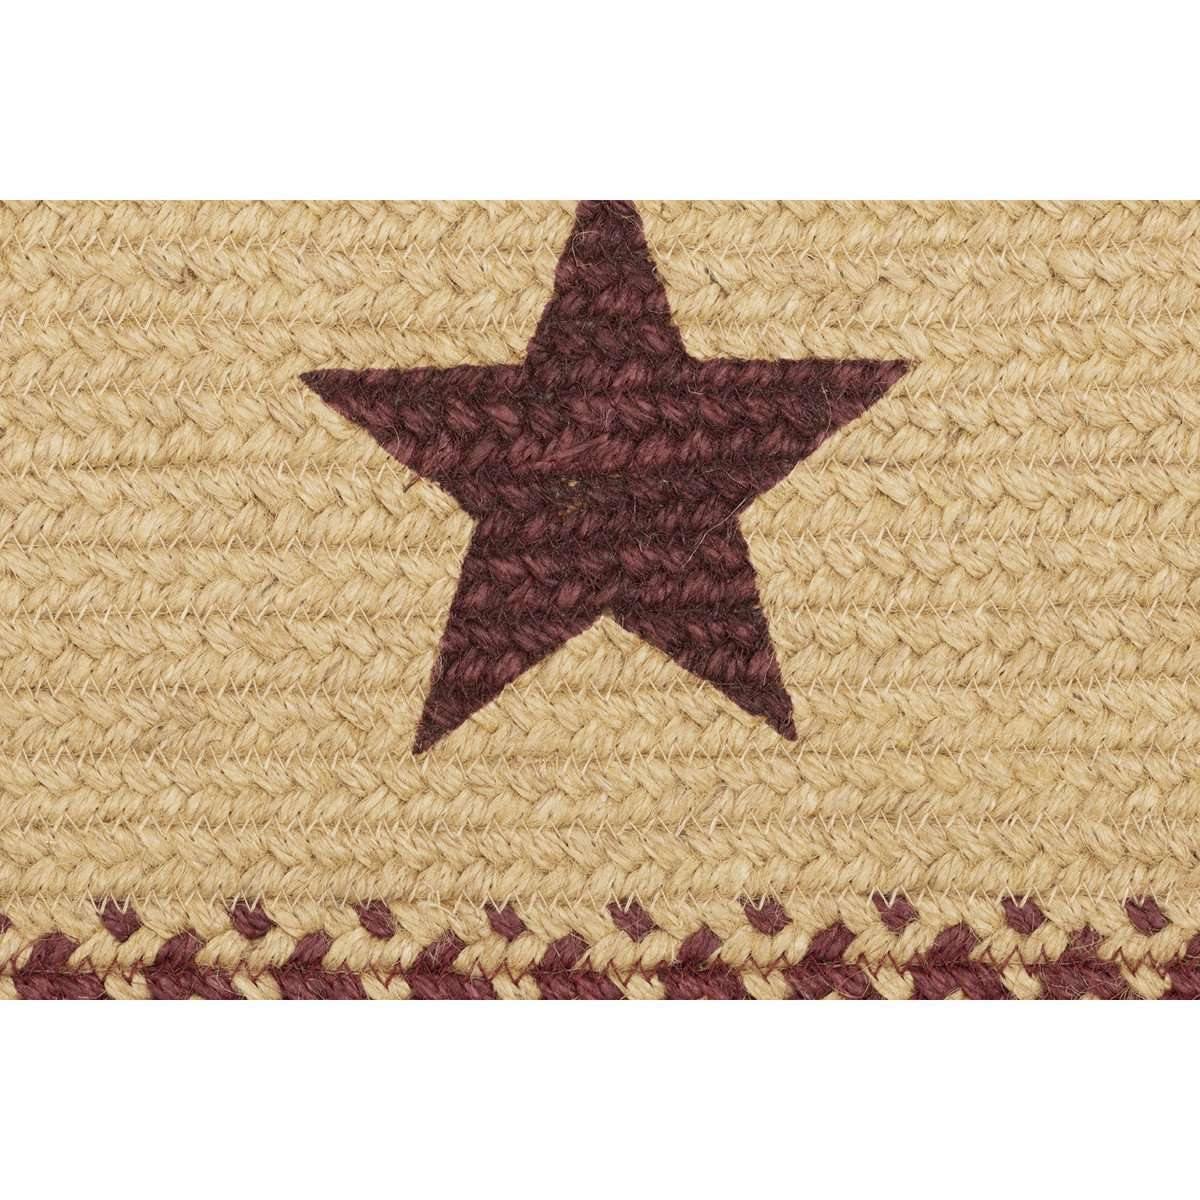 Burgundy Red Primitive Jute Braided Rug Rect Stencil Stars Welcome 20"x30" VHC Brands - The Fox Decor